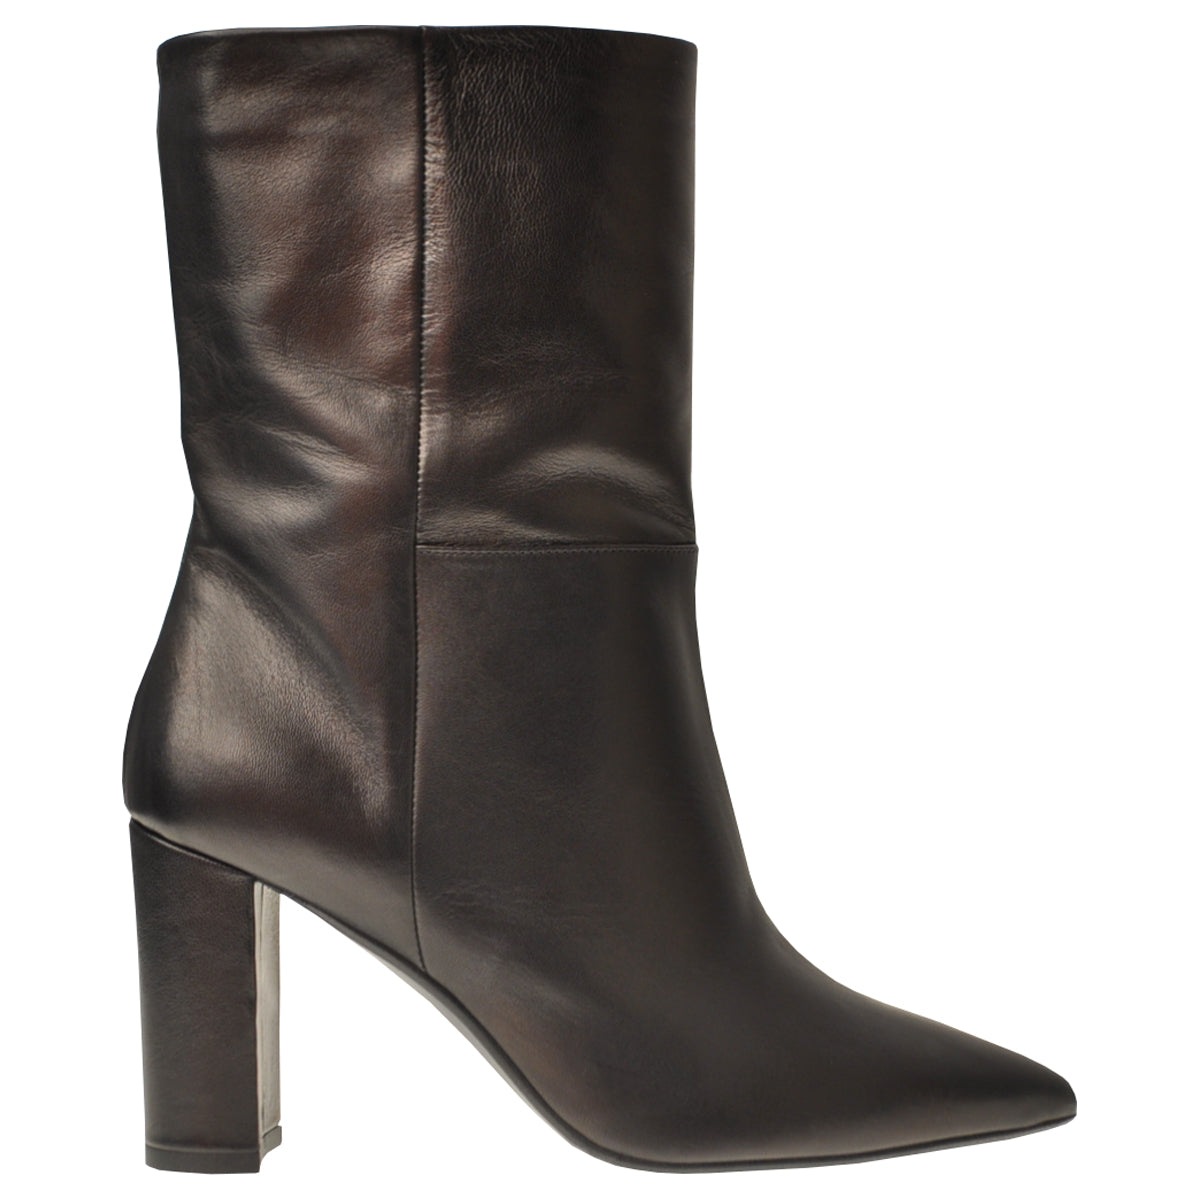 Black leather ankle boots with straight shaft. 